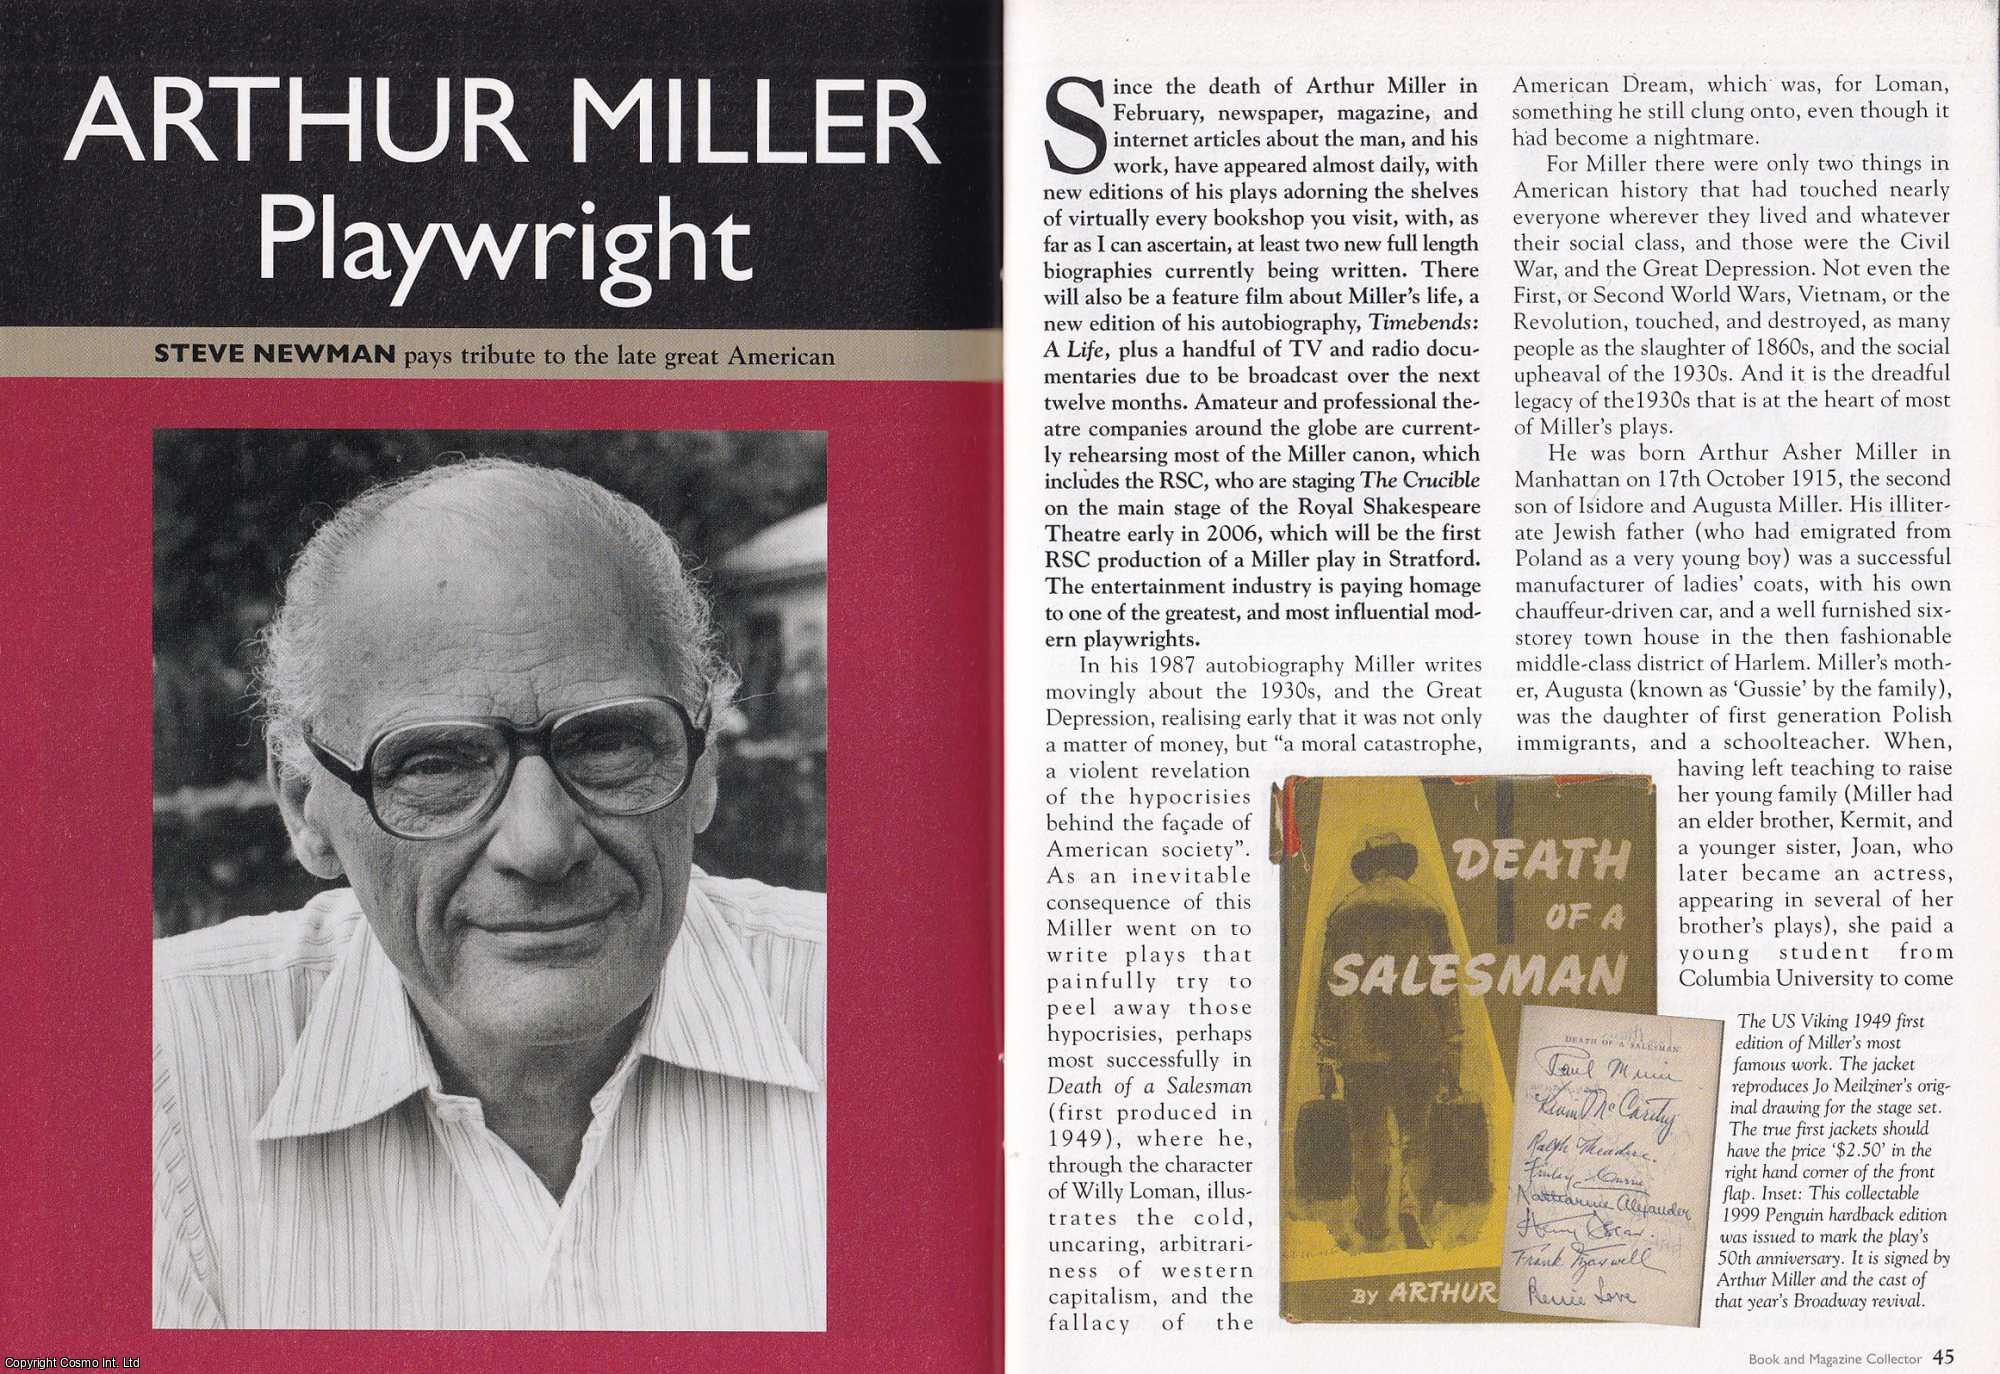 Steve Newman - Arthur Miller. Playwright. Paying Tribute to The Late Great American. This is an original article separated from an issue of The Book & Magazine Collector publication.